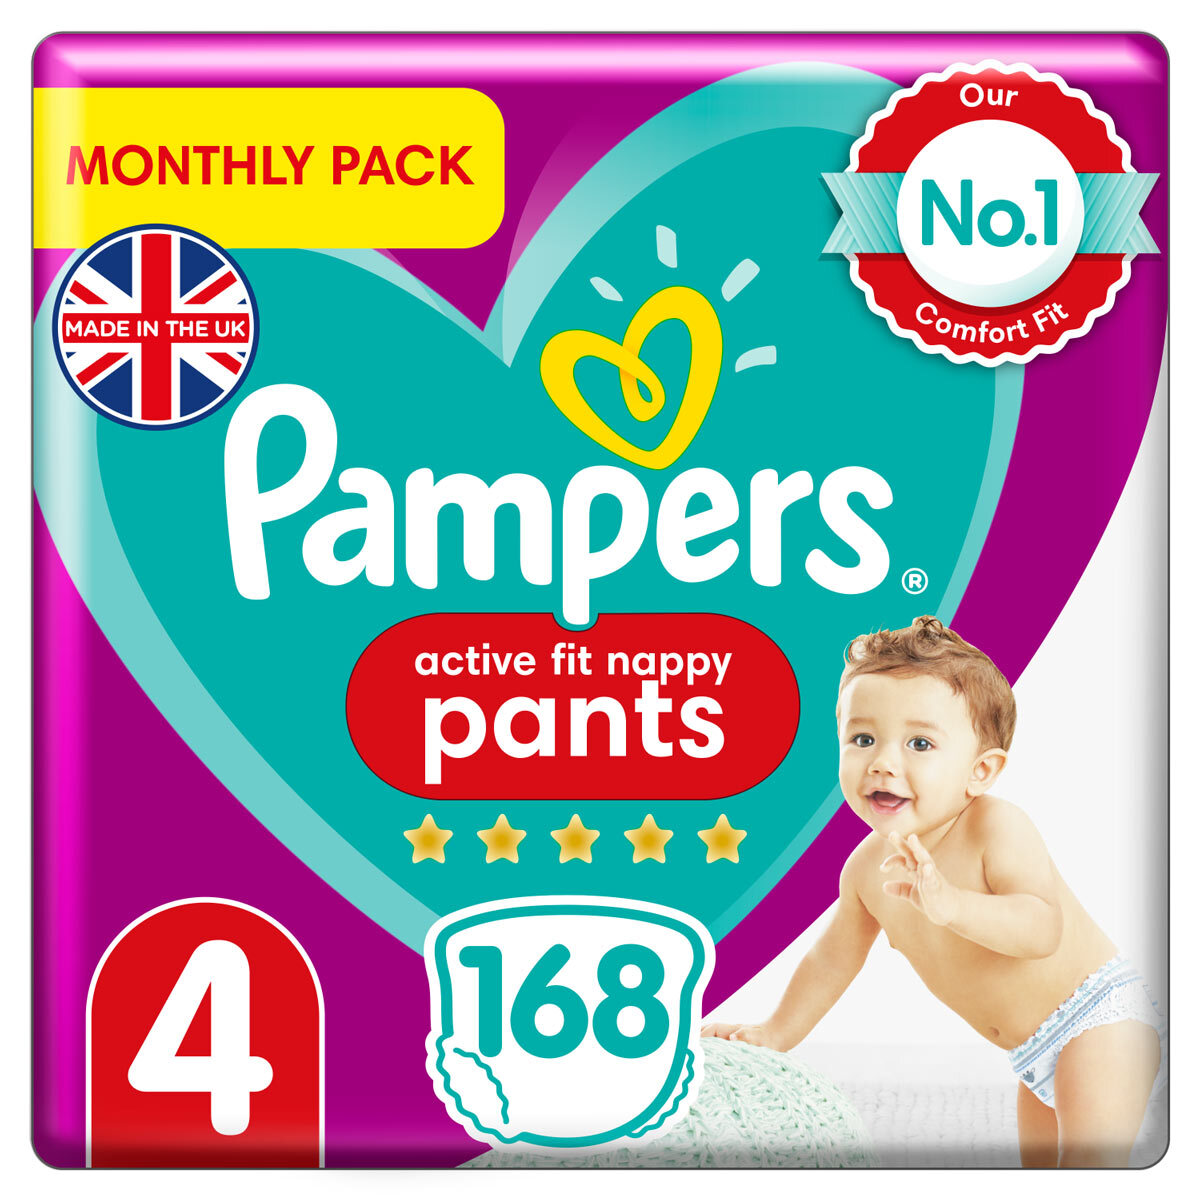 Pampers Active Fit Nappy Pants Size 4, 168 Monthly Pack